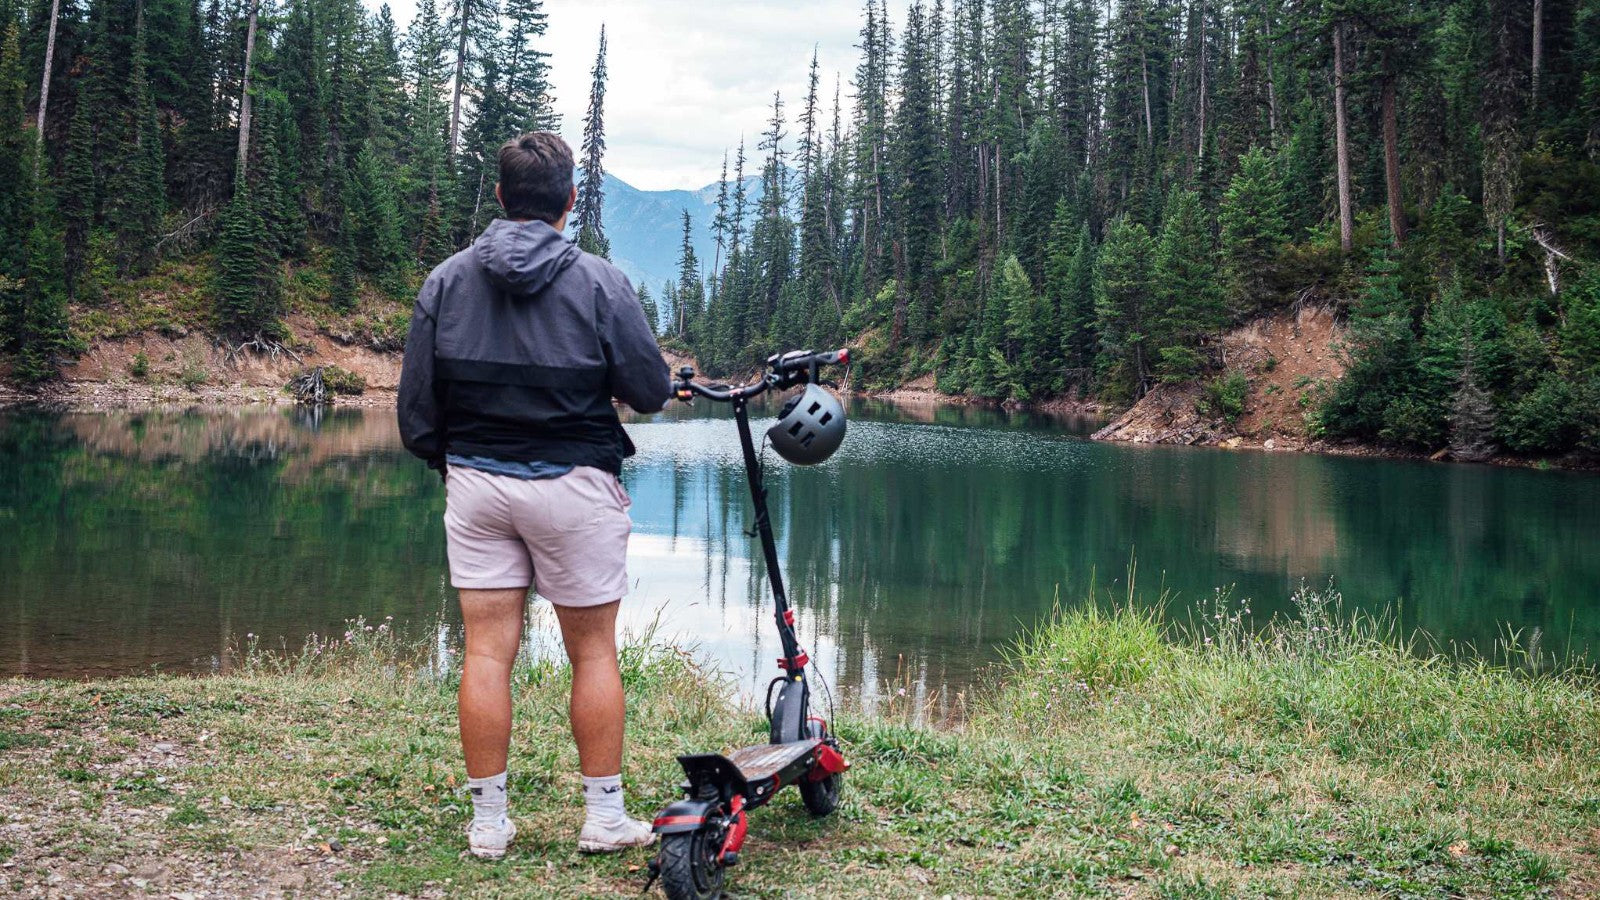 Father's Day Fun Starts Here: Get a Commuter Scooter and Enjoy the Great Outdoors!